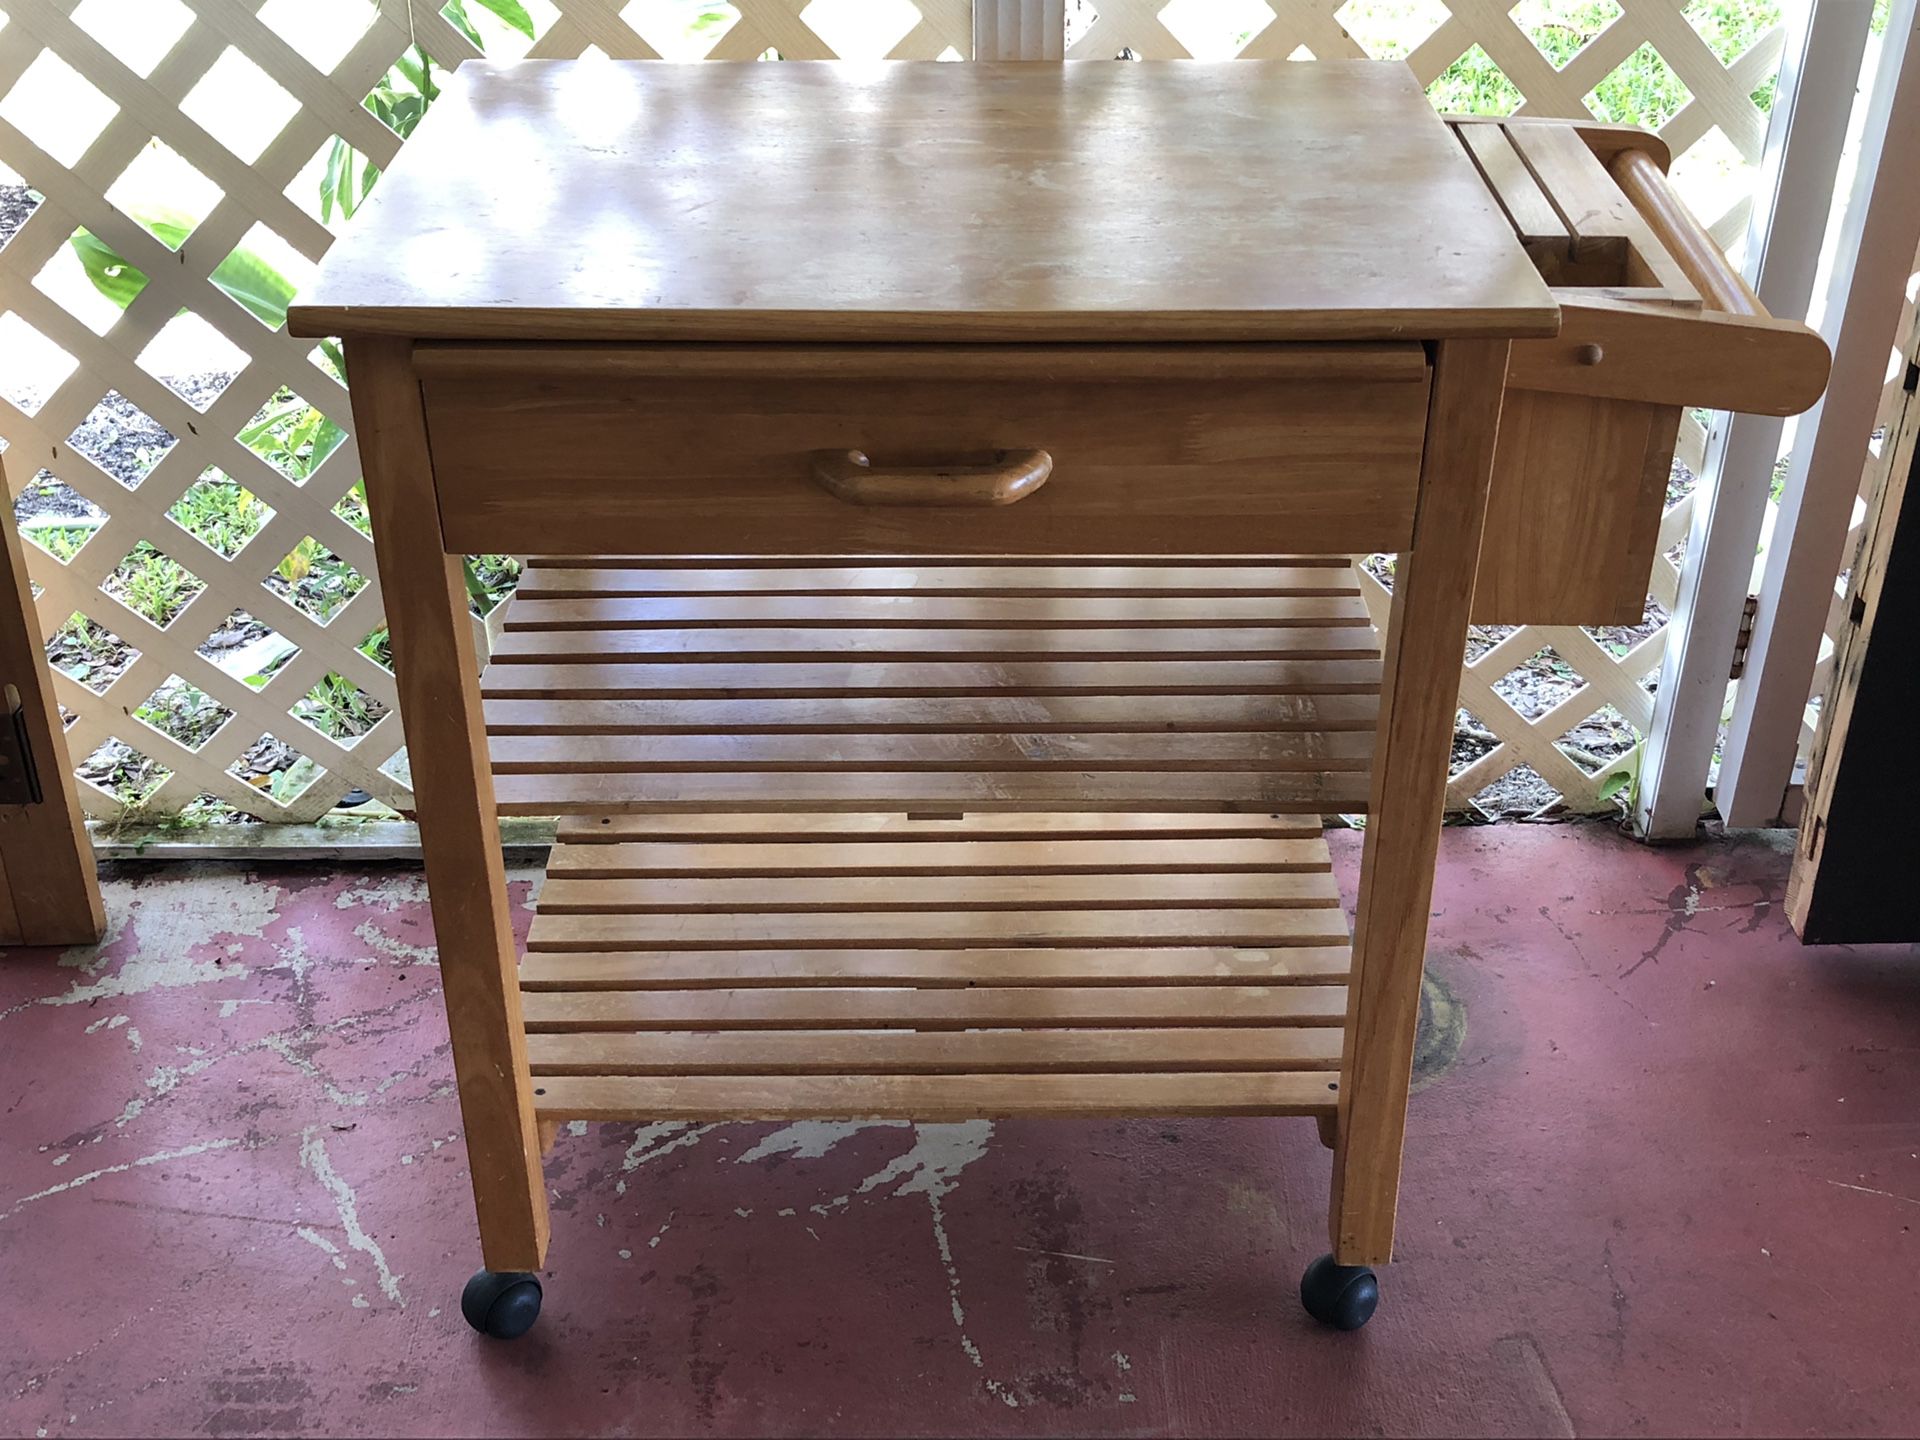 $25 Wooden Rolling Table